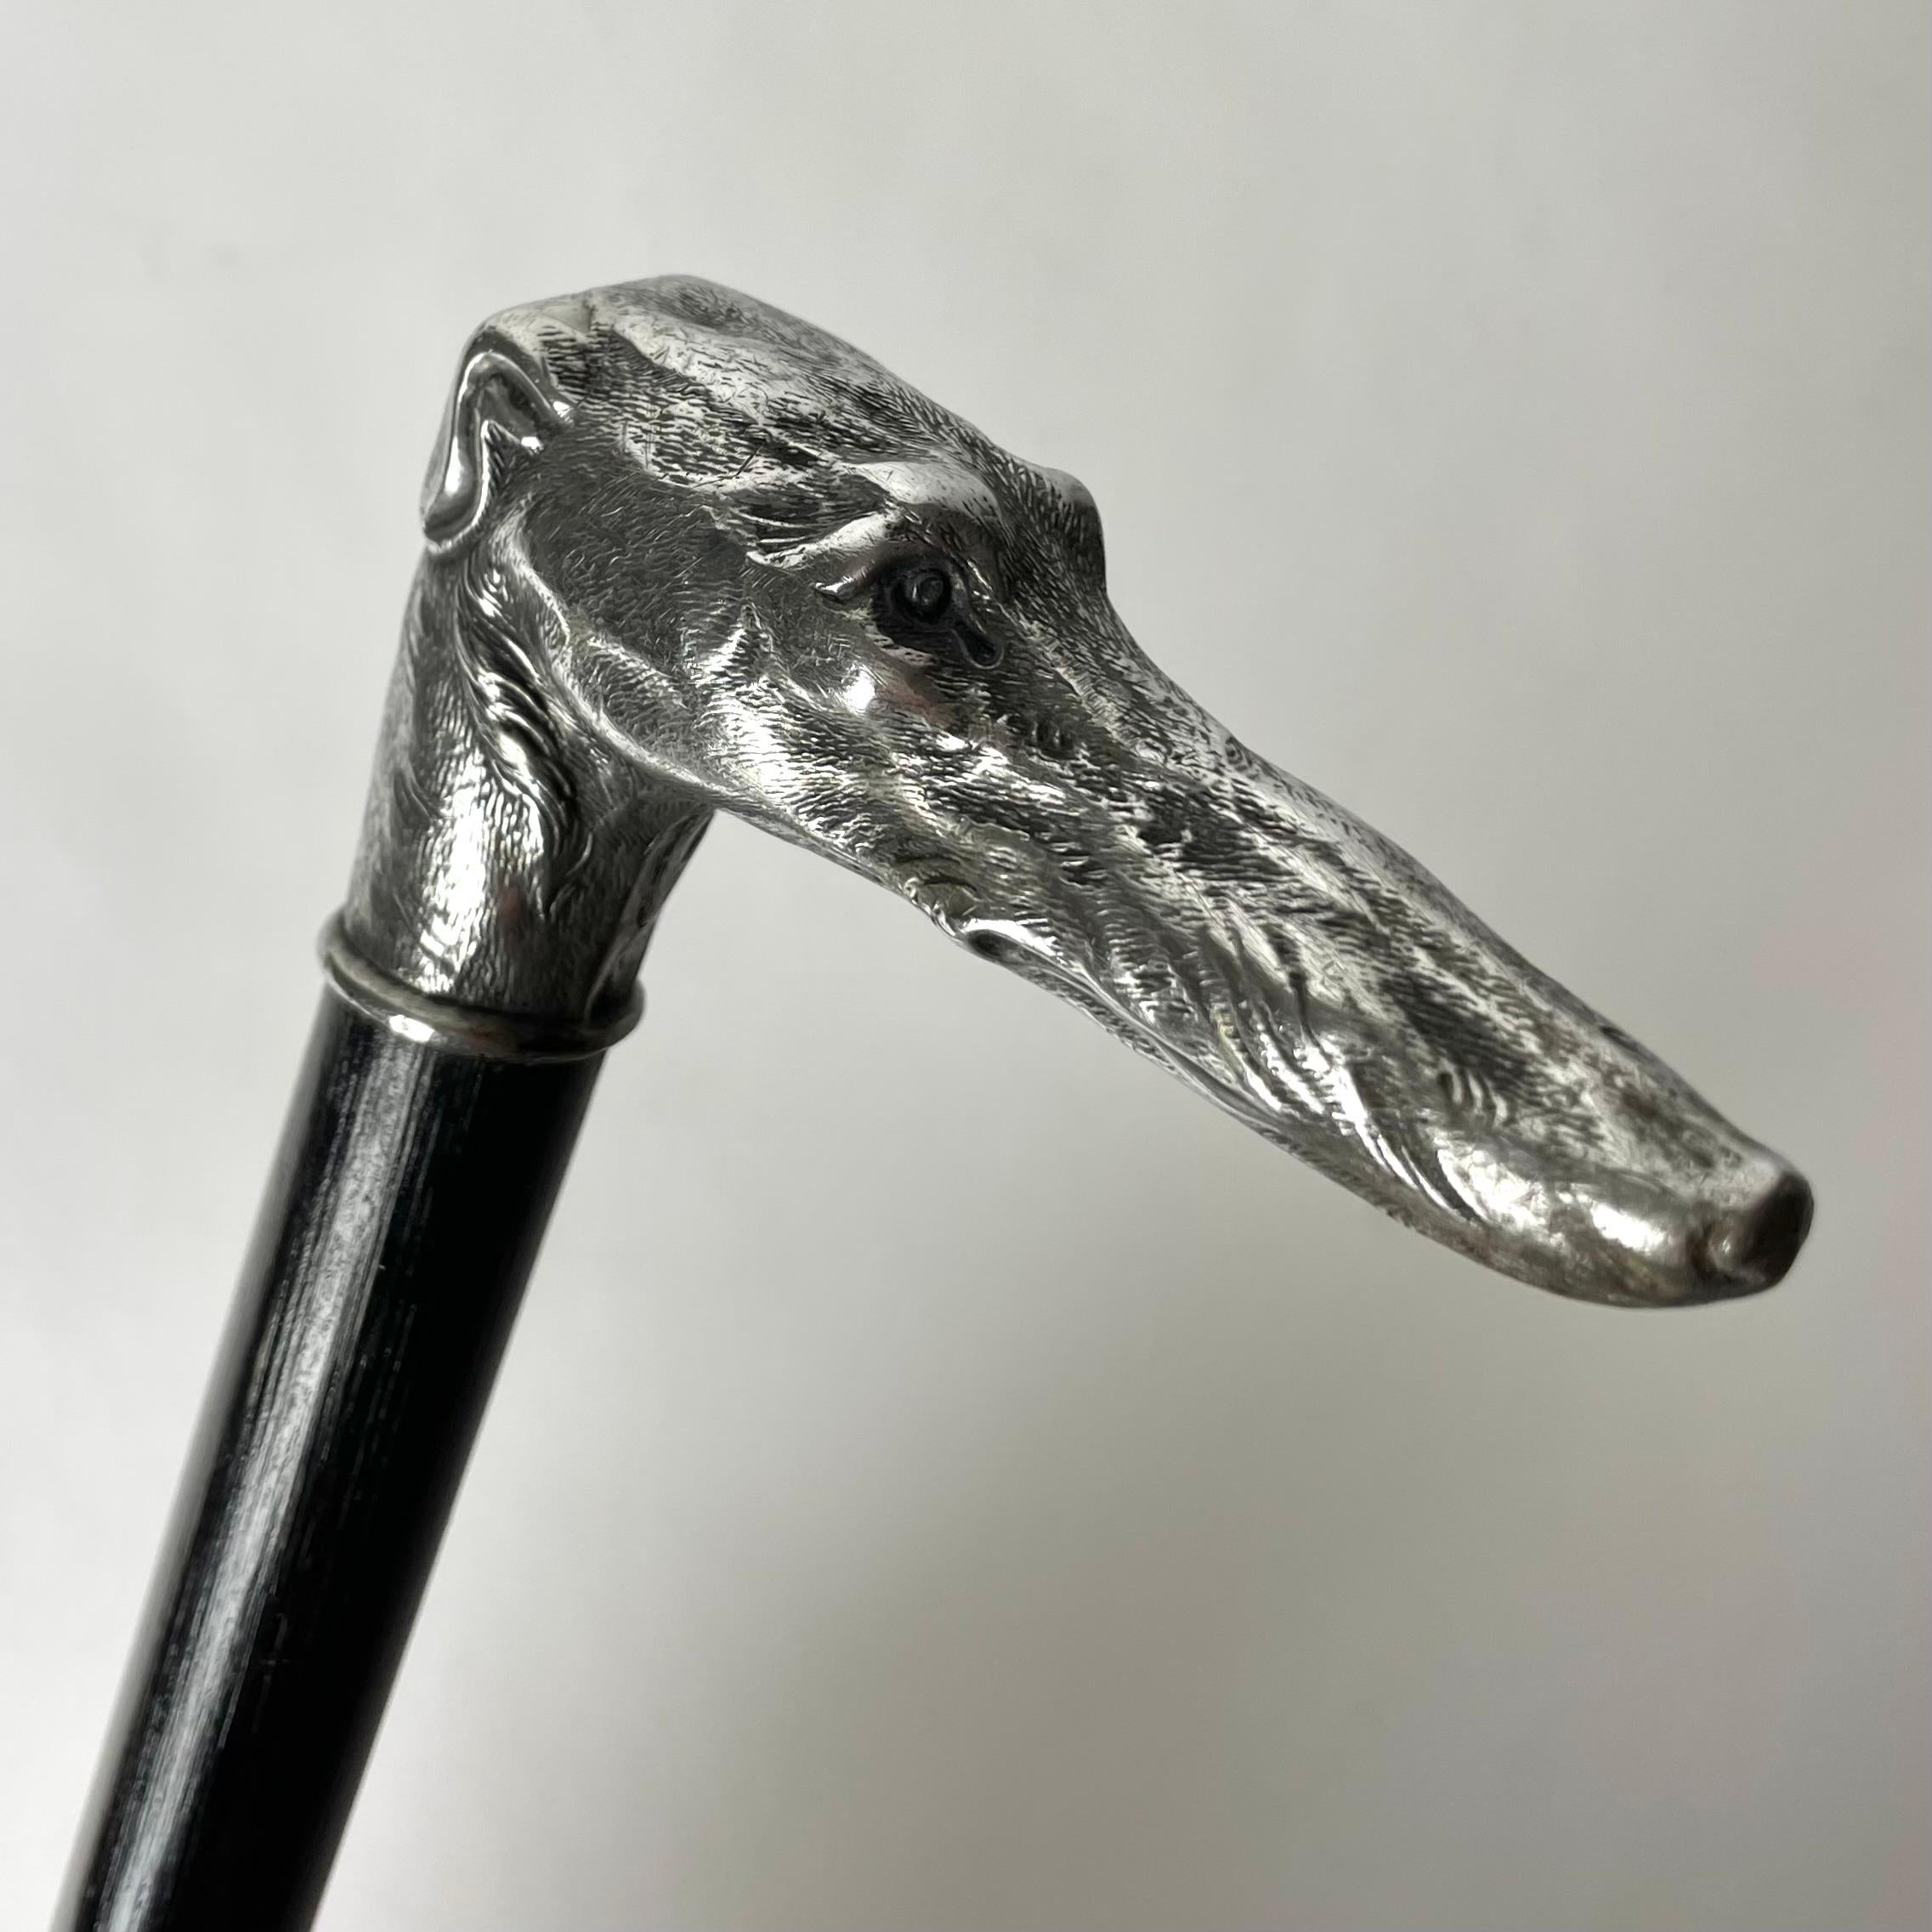 Wood Antique Walking Cane/Stick with Greyhound head in White Metal, late 19th Century For Sale